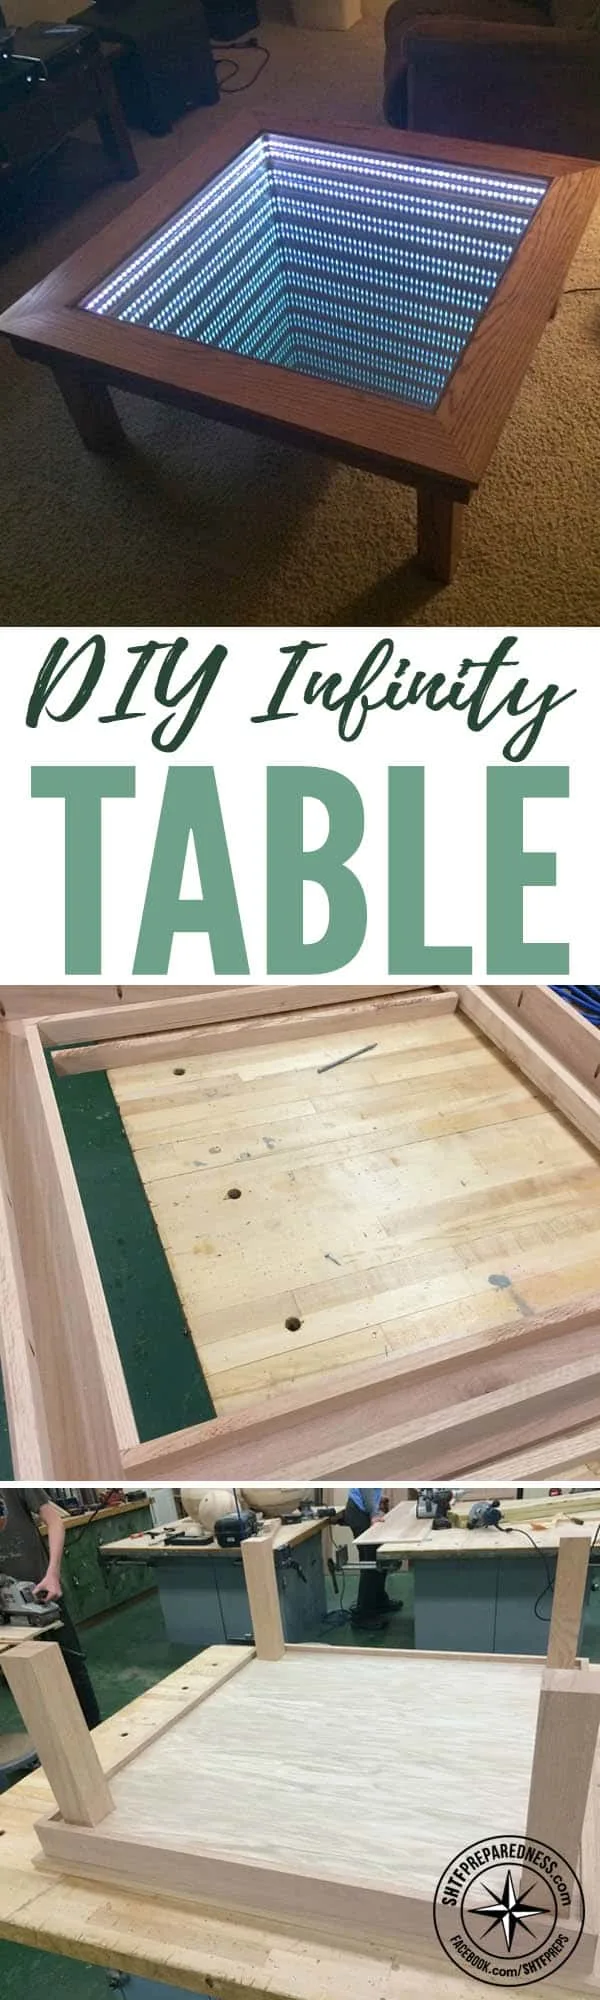 DIY Infinity Table — DIY woodworking projects are a fun hobby and can be a great way to generate income. There are countless designs you can come up with, and it can be a thrill to craft something unique.